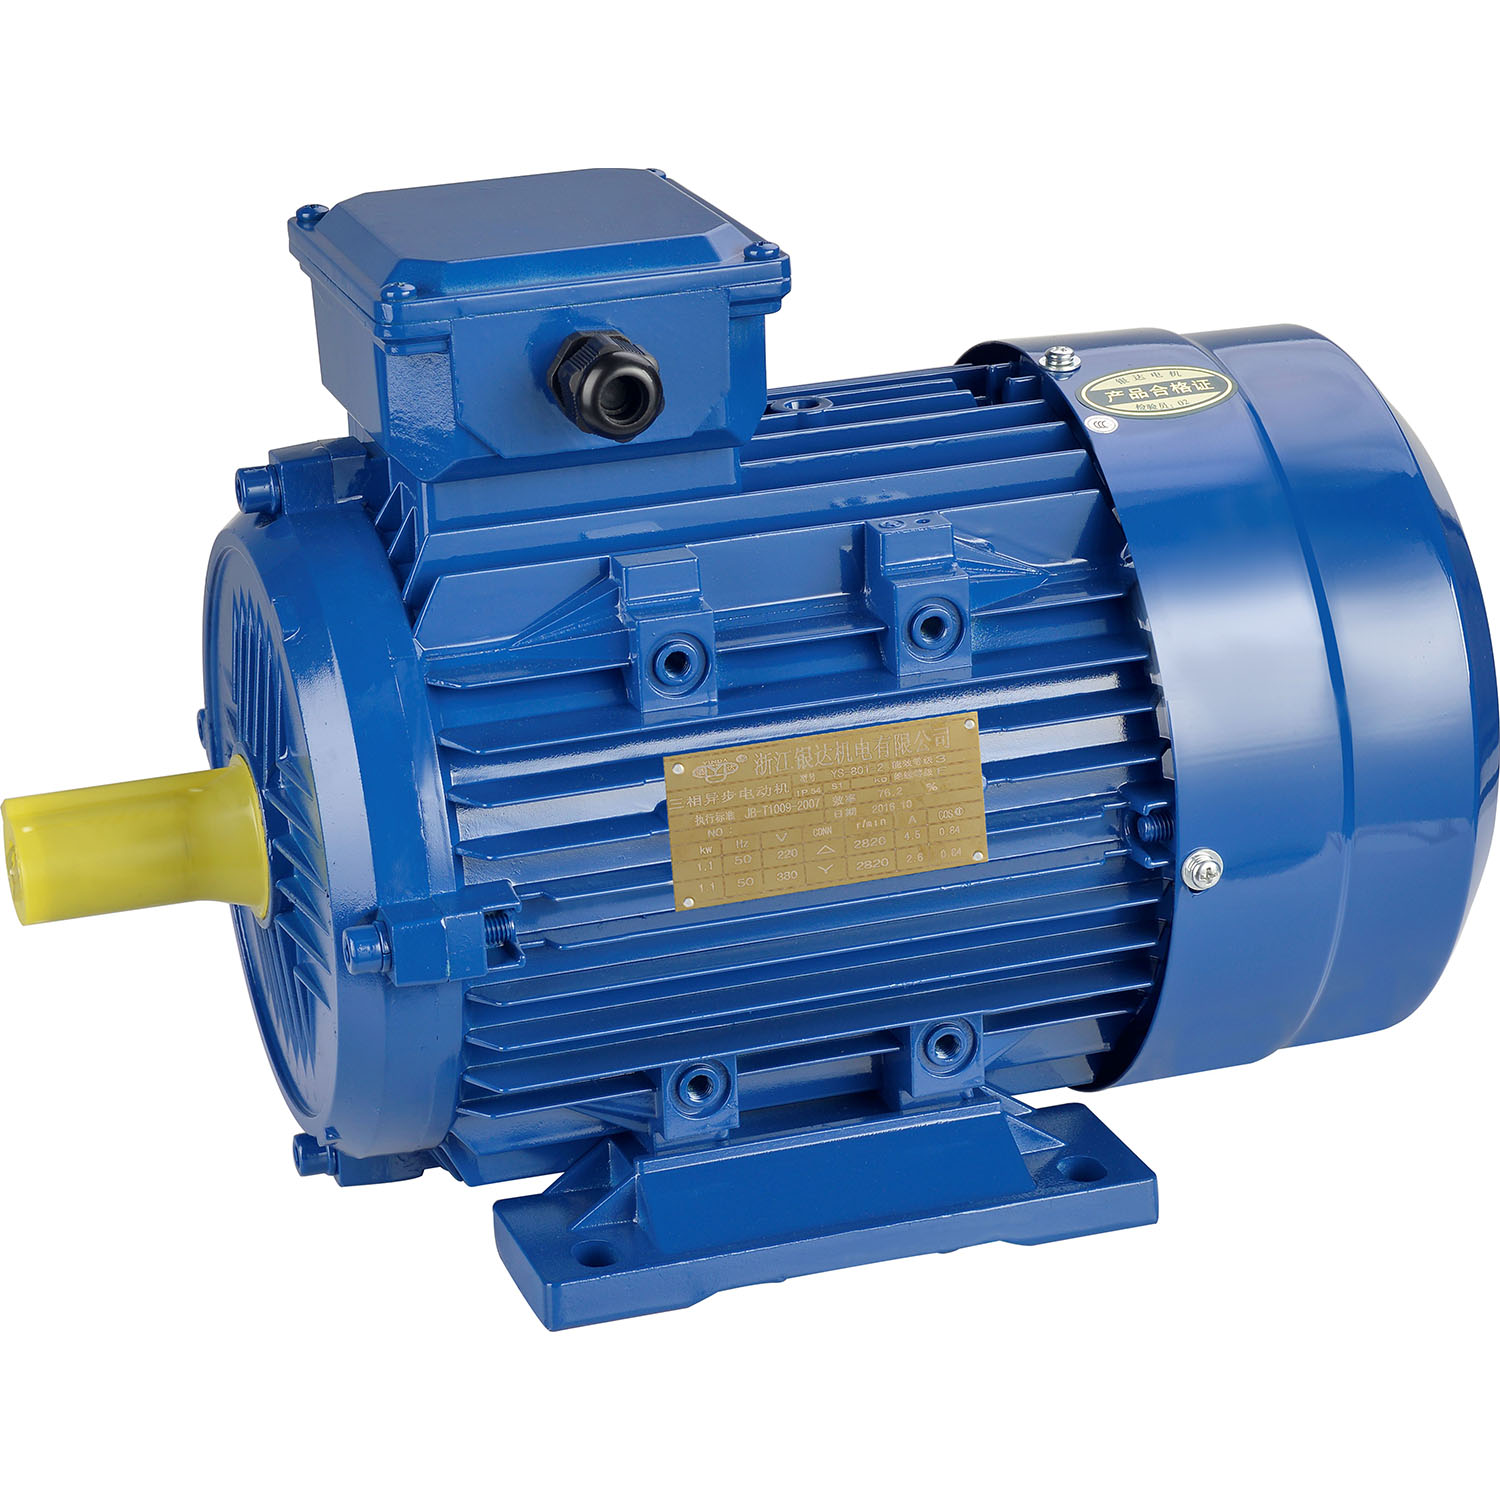 YS-711-4 0.25KW 0.33HP aluminum cylinder series high efficiency three-phase asynchronous motor